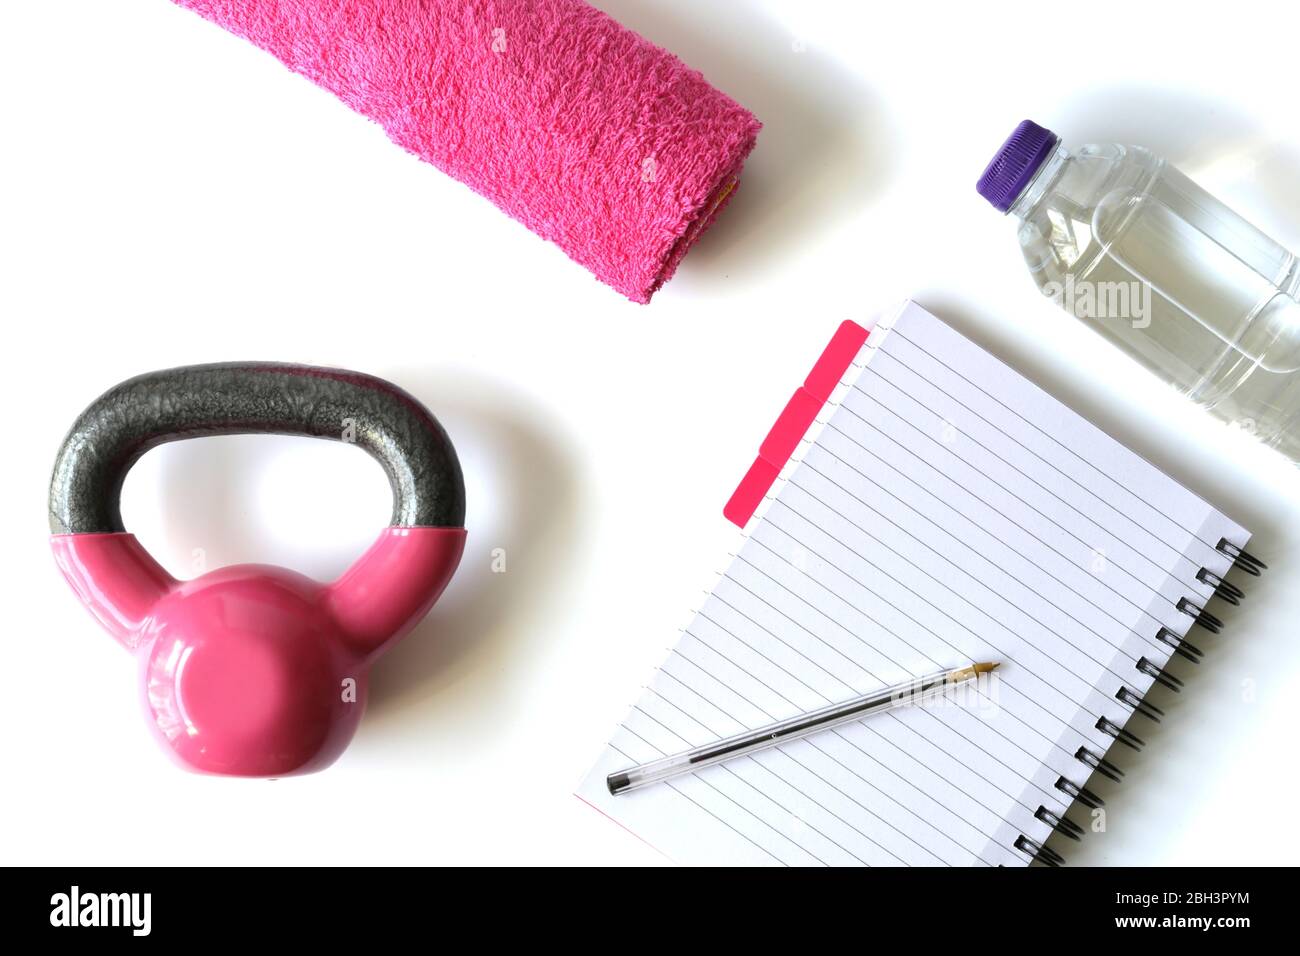 https://c8.alamy.com/comp/2BH3PYM/healthy-life-style-pink-accessories-on-white-background-top-view-flat-lay-diet-and-fitness-concept-rerecording-achievements-vs-goals-setting-goal-2BH3PYM.jpg